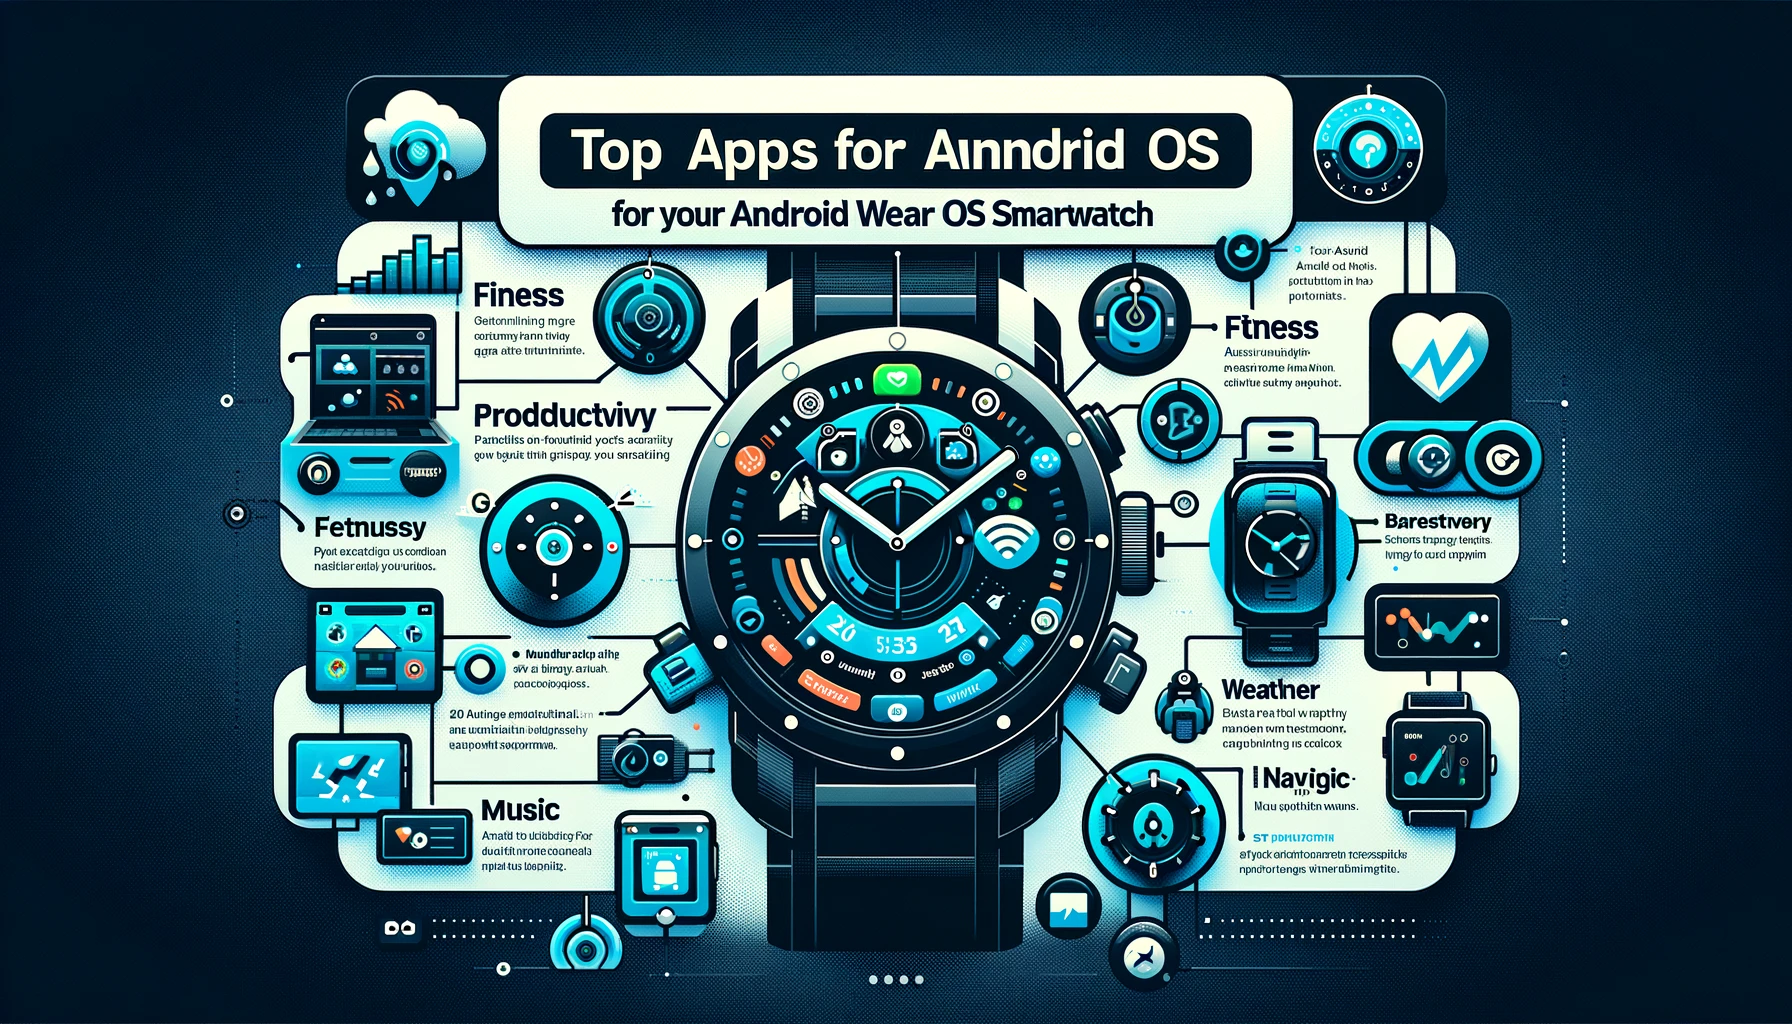 infographic images showcasing the best apps for an Android Wear OS smartwatch.